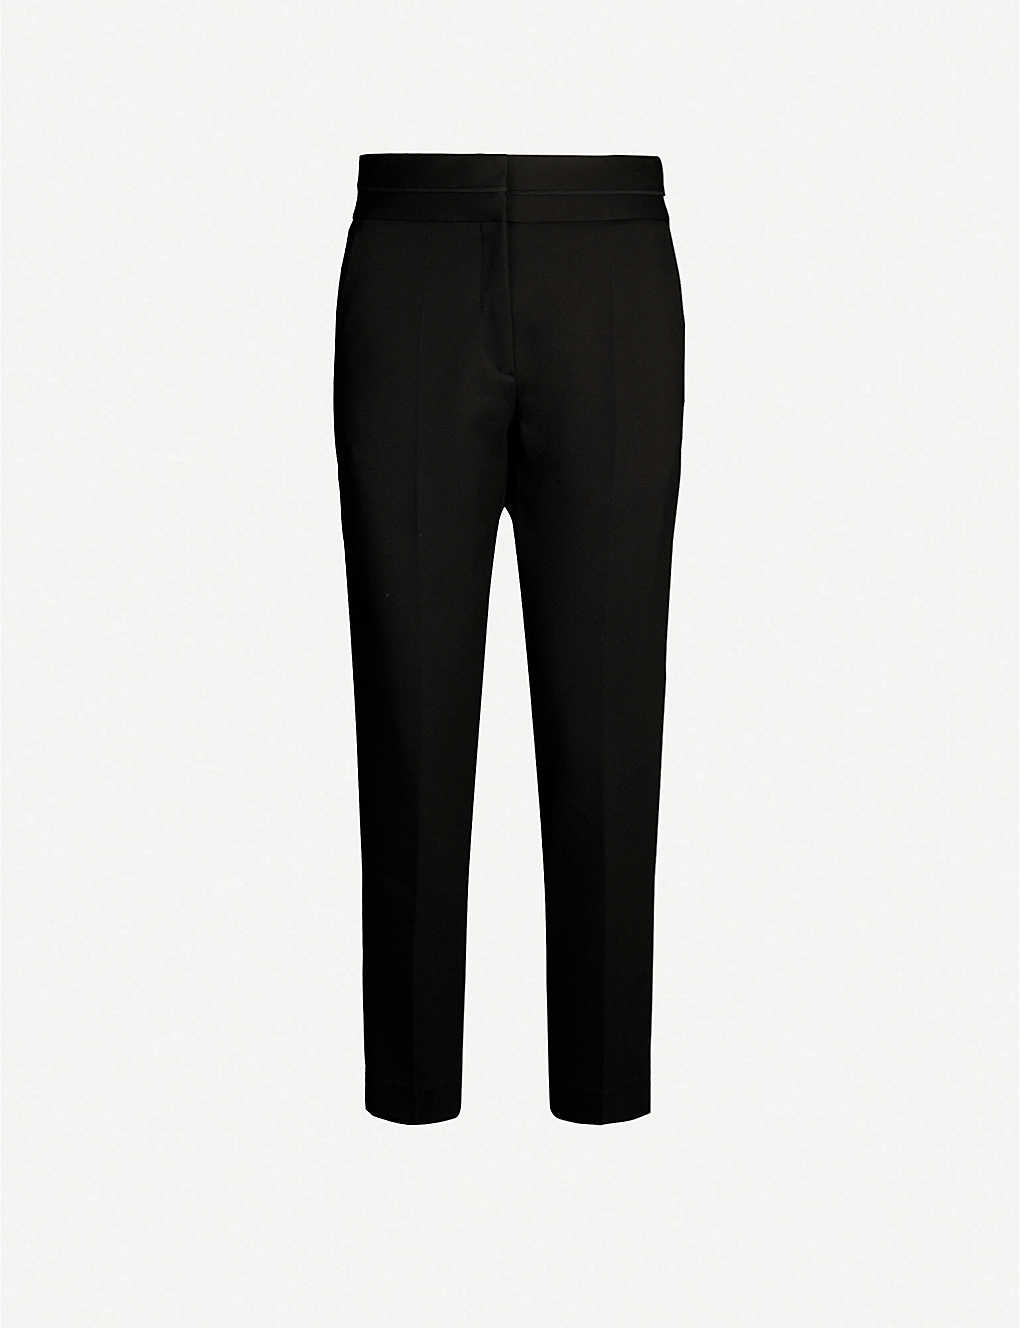 Shop Sandro Women's Black Tapered High-rise Stretch-woven Trousers